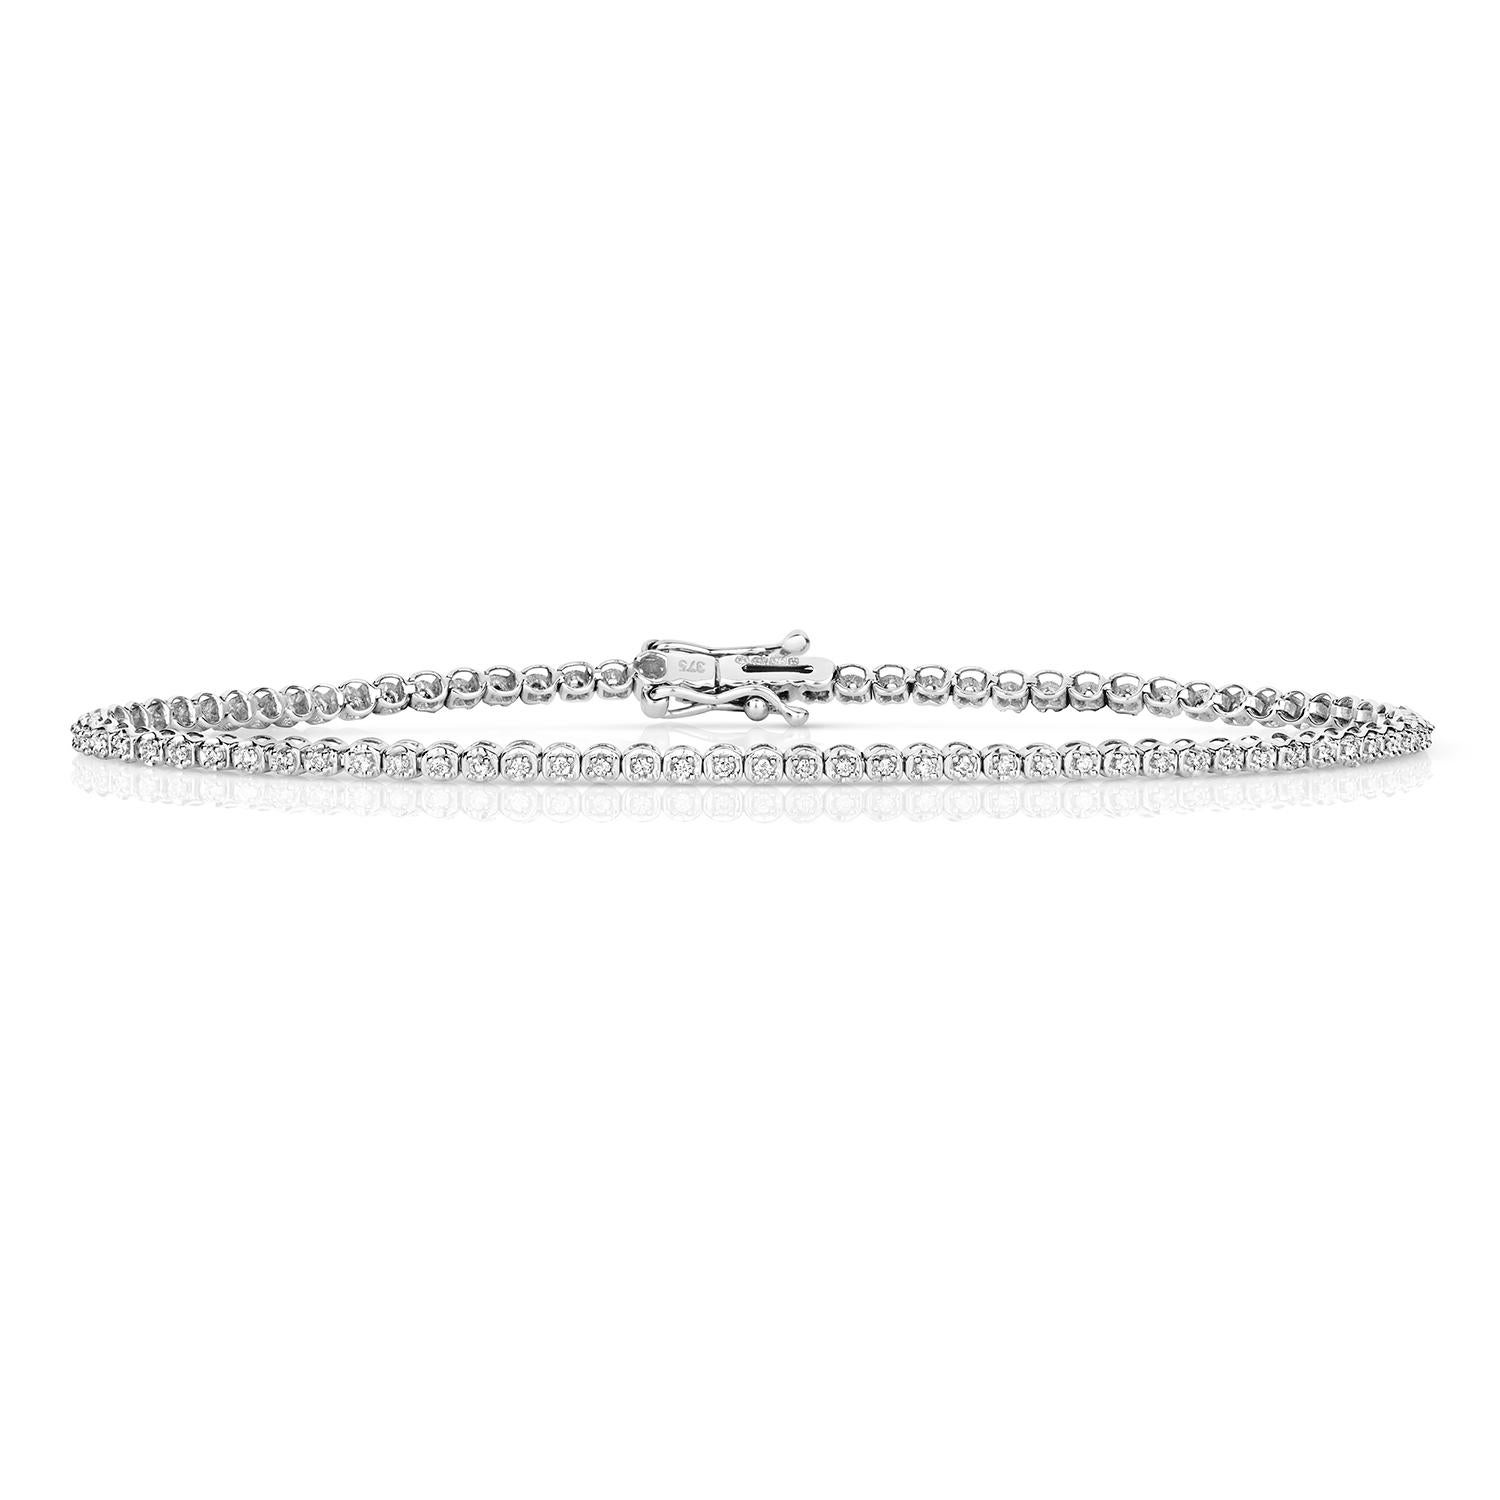 DIAMOND BRACELET

9CT W/G HI I1 0.50CT

Weight: 3.3g

Number Of Stones:85

Total Carates:0.500